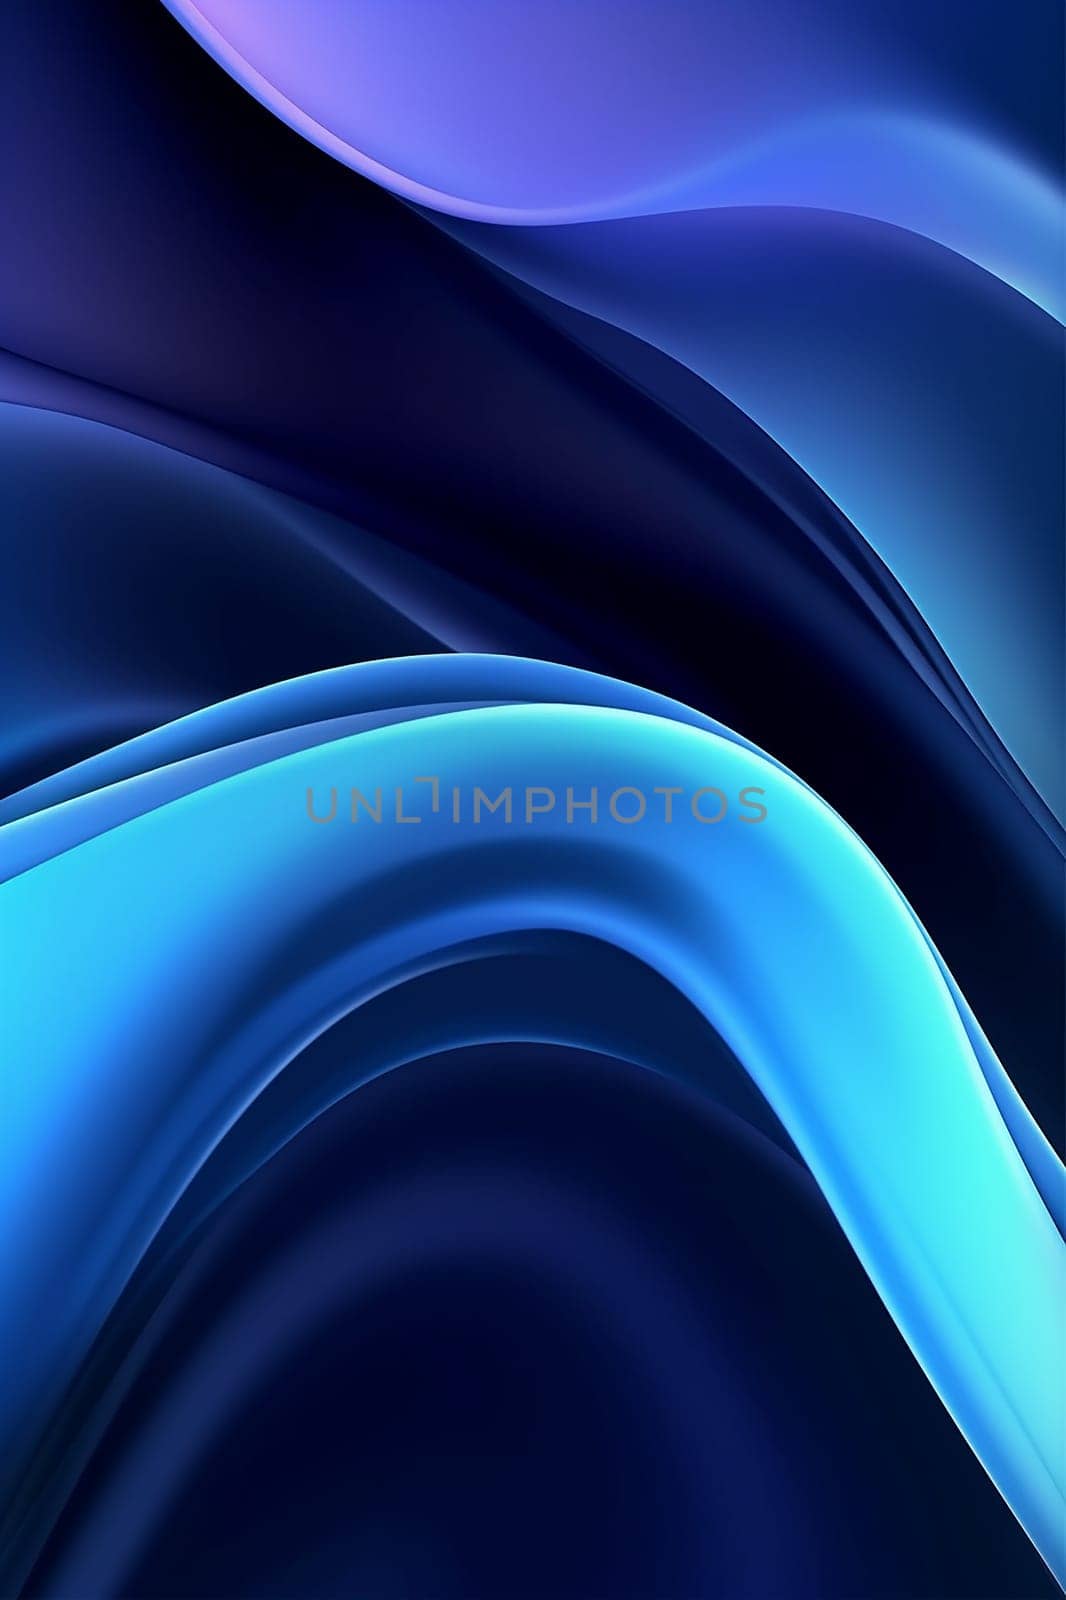 Curved smooth waves, blue cloth, blue satin by Hype2art